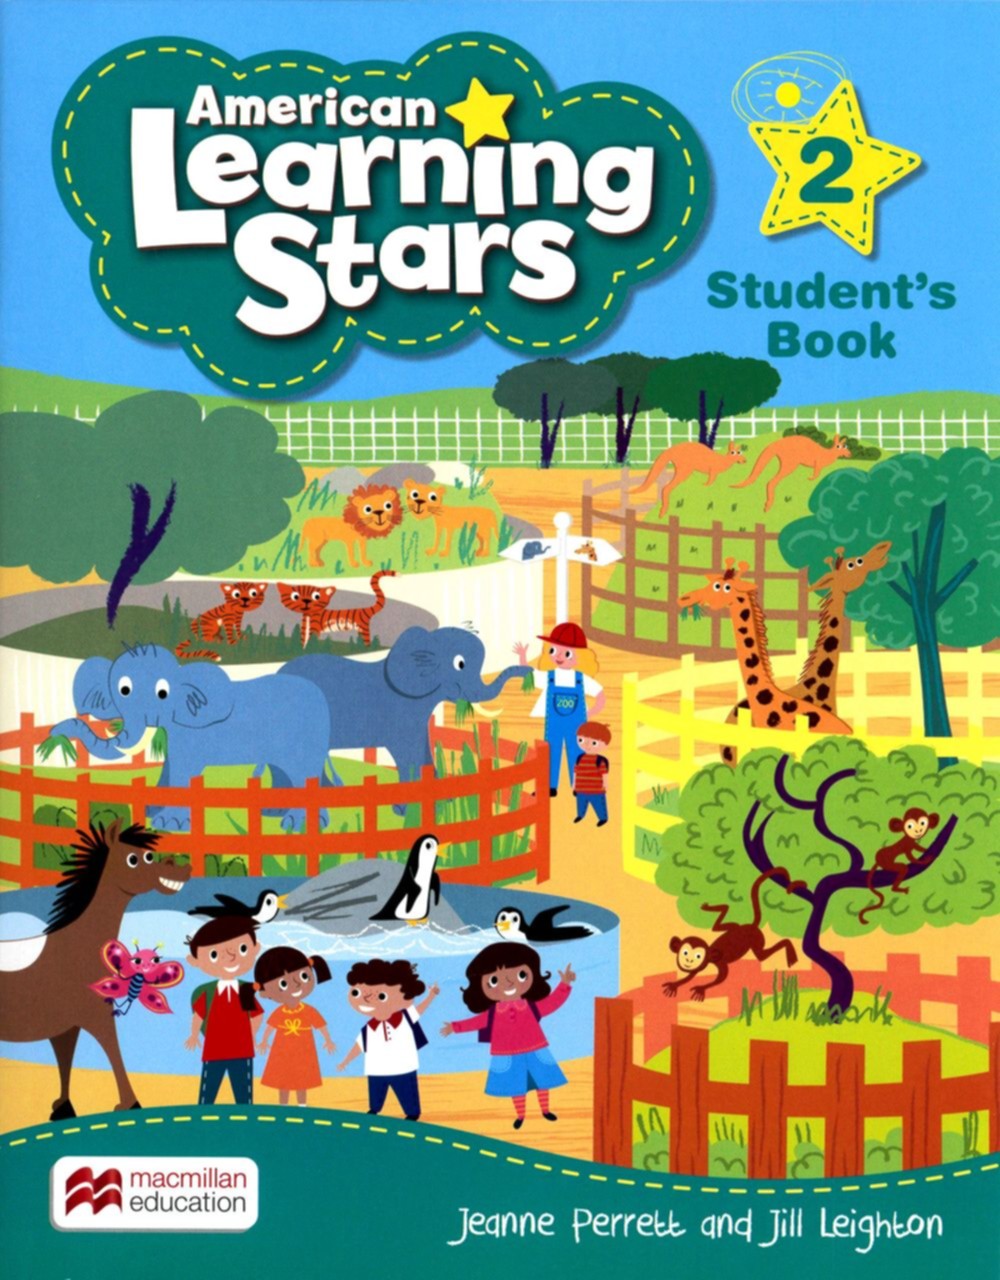 American Learning Stars (2) Student’s Book